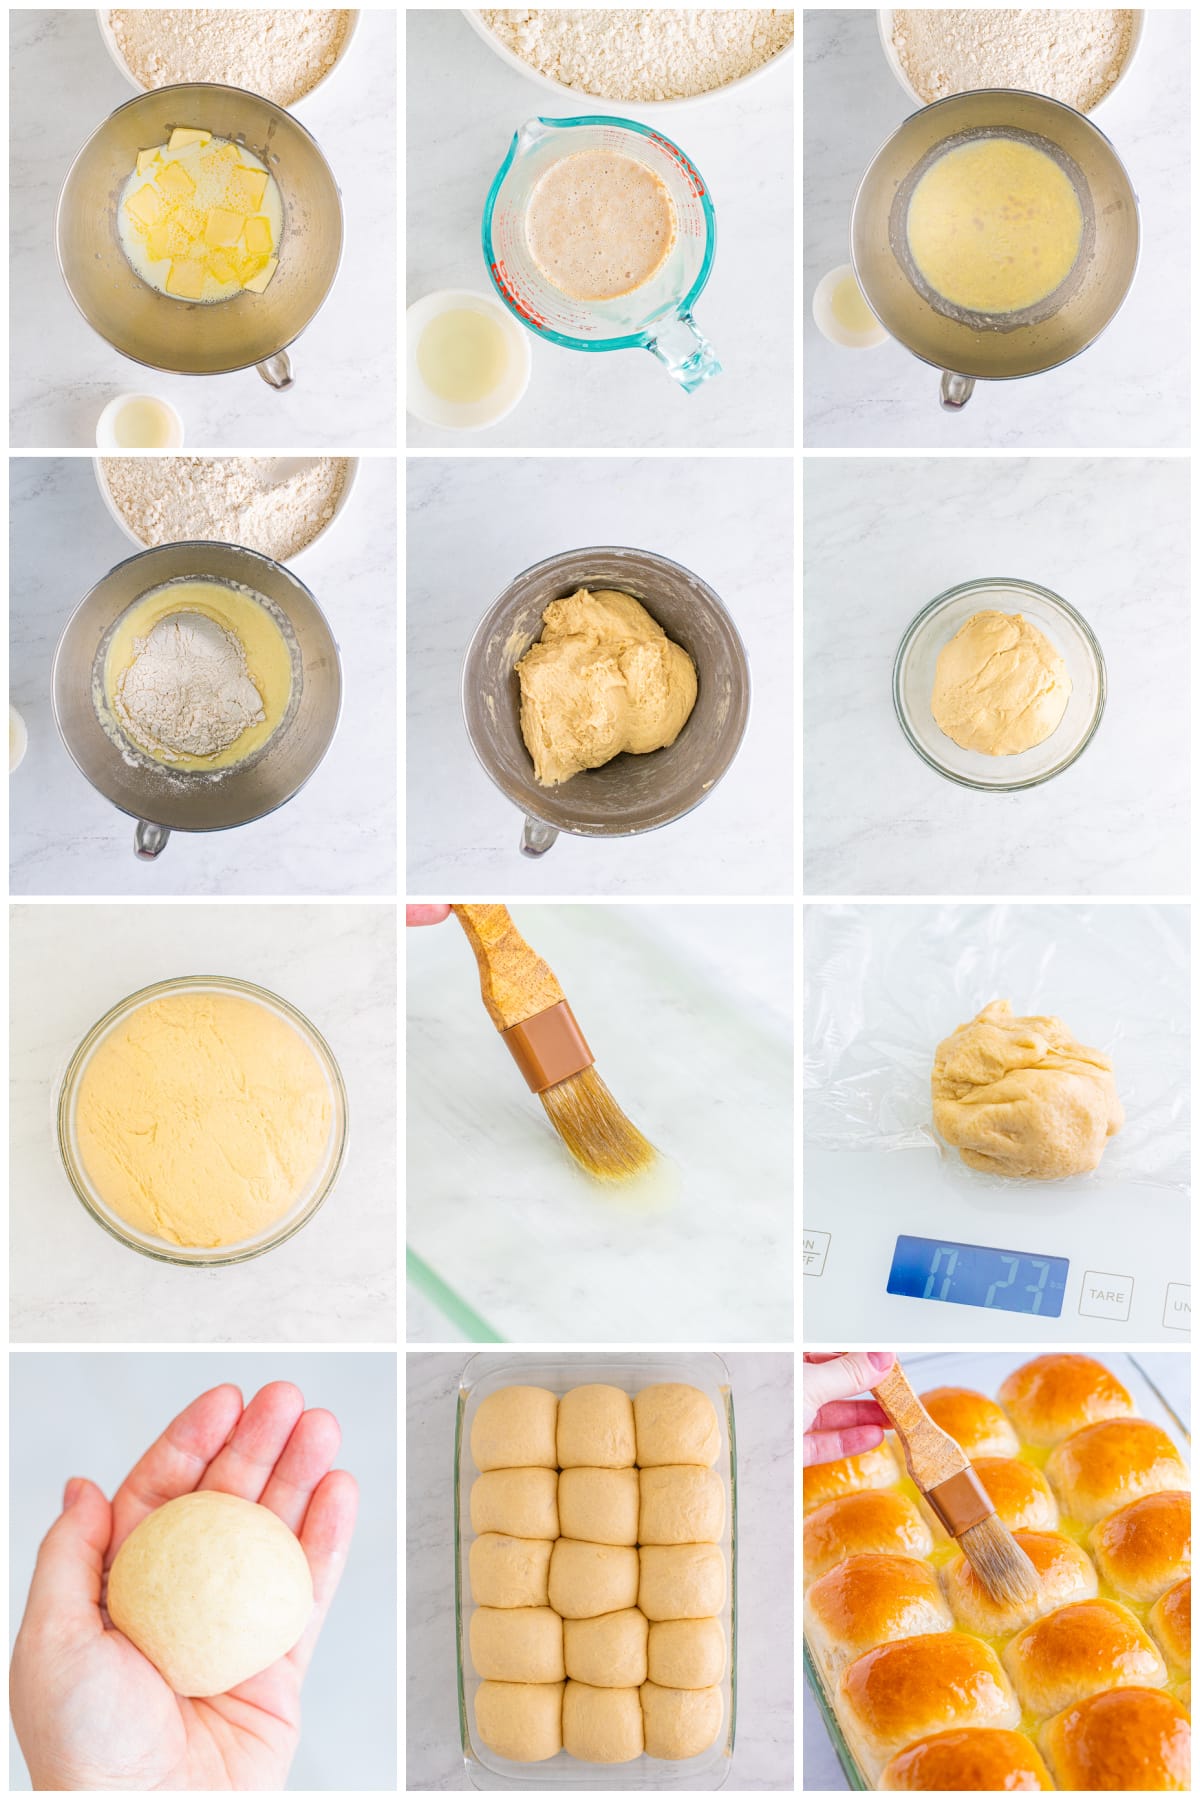 Step by step photos on how to make a Dinner Roll Recipe.